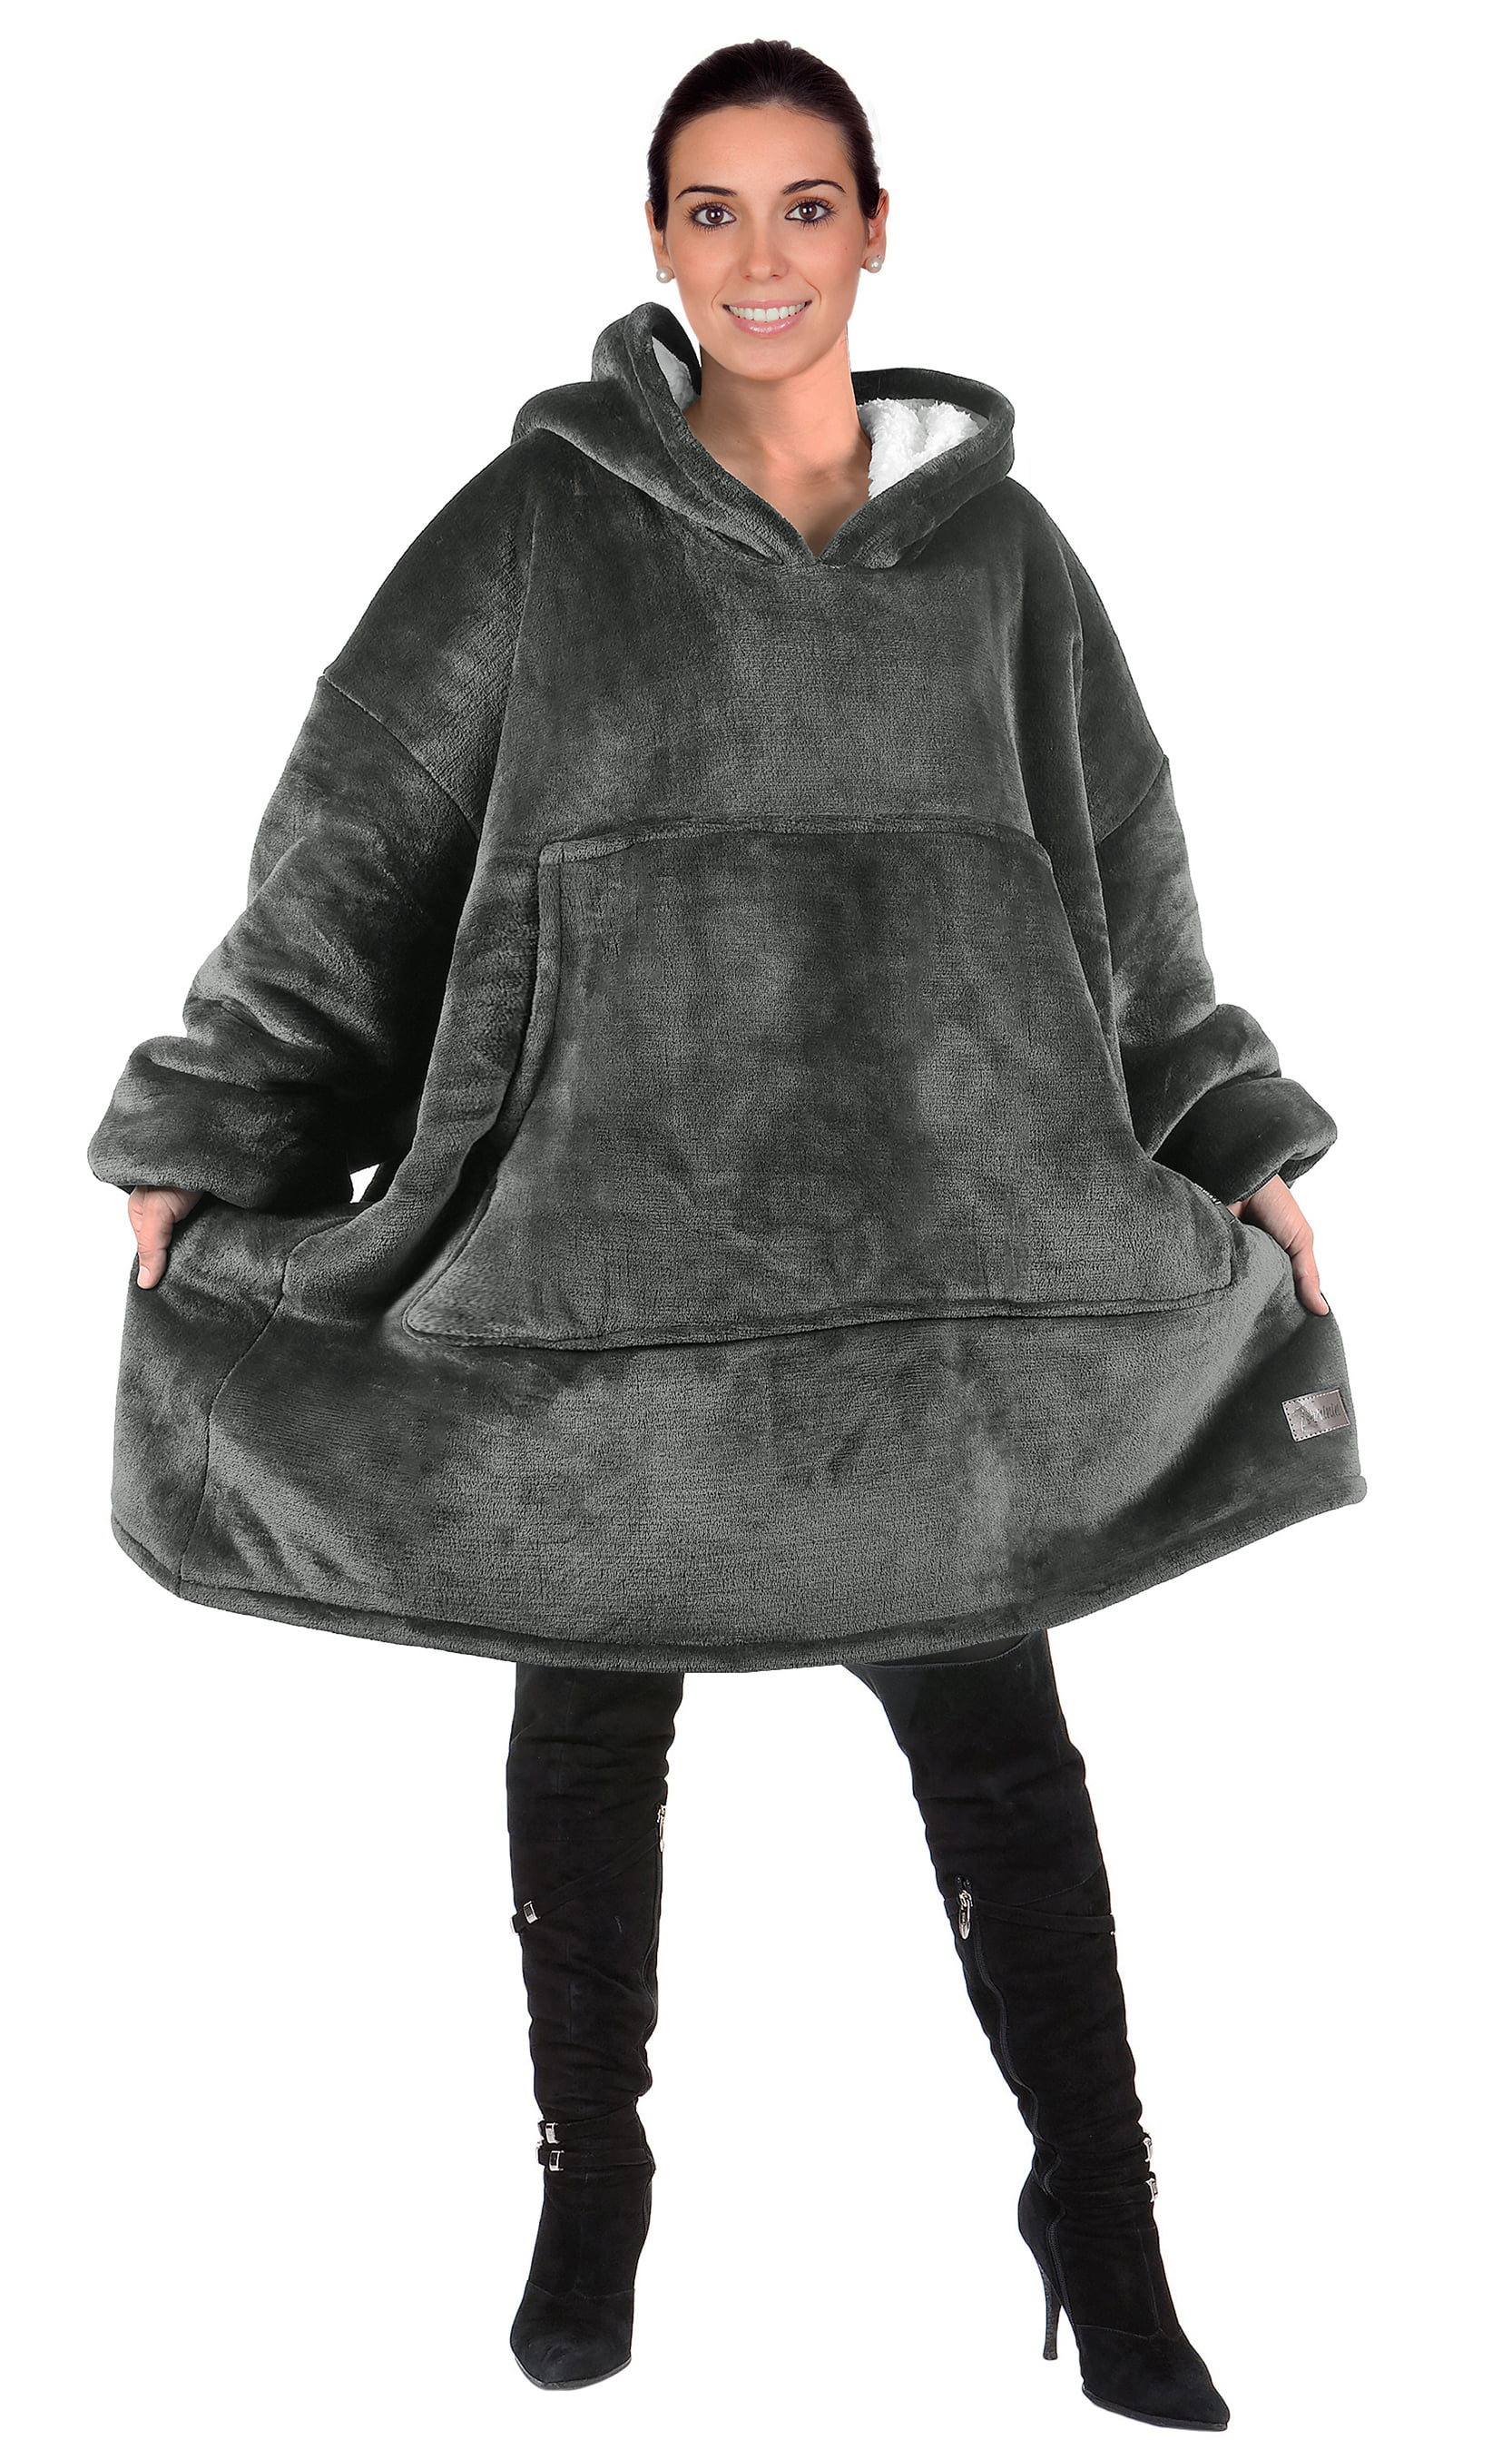 Segorts Oversized Blanket Sweatshirt Sherpa Giant Hoodie Reversible with Throw Large Pocket for Adults Men Women Teenager One Size 